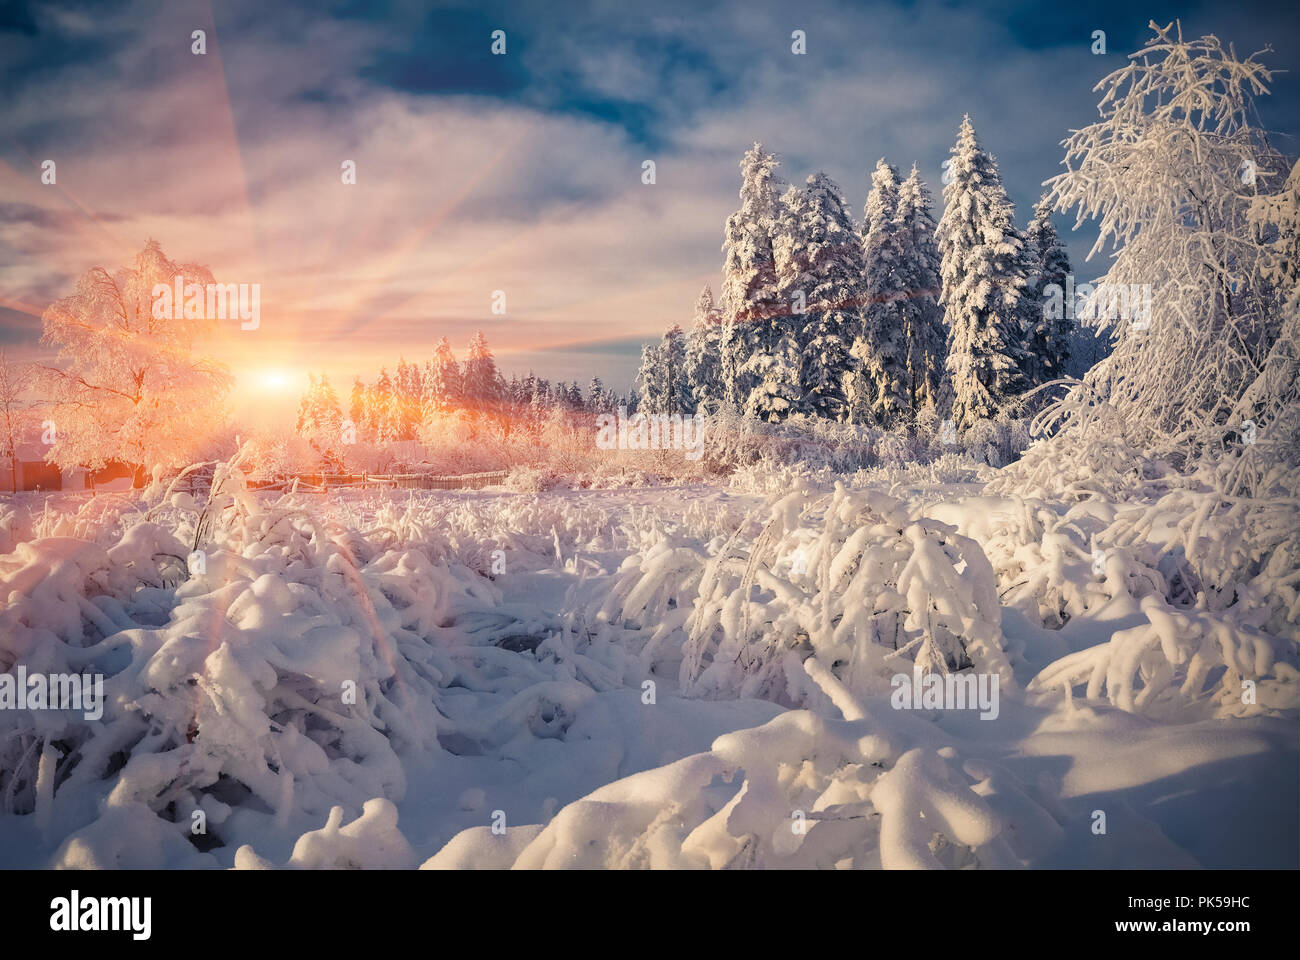 Colorful winter scene in the mountain forest. Fir trees covered fresh snow at frosty morning glowing first sunlight. Stock Photo